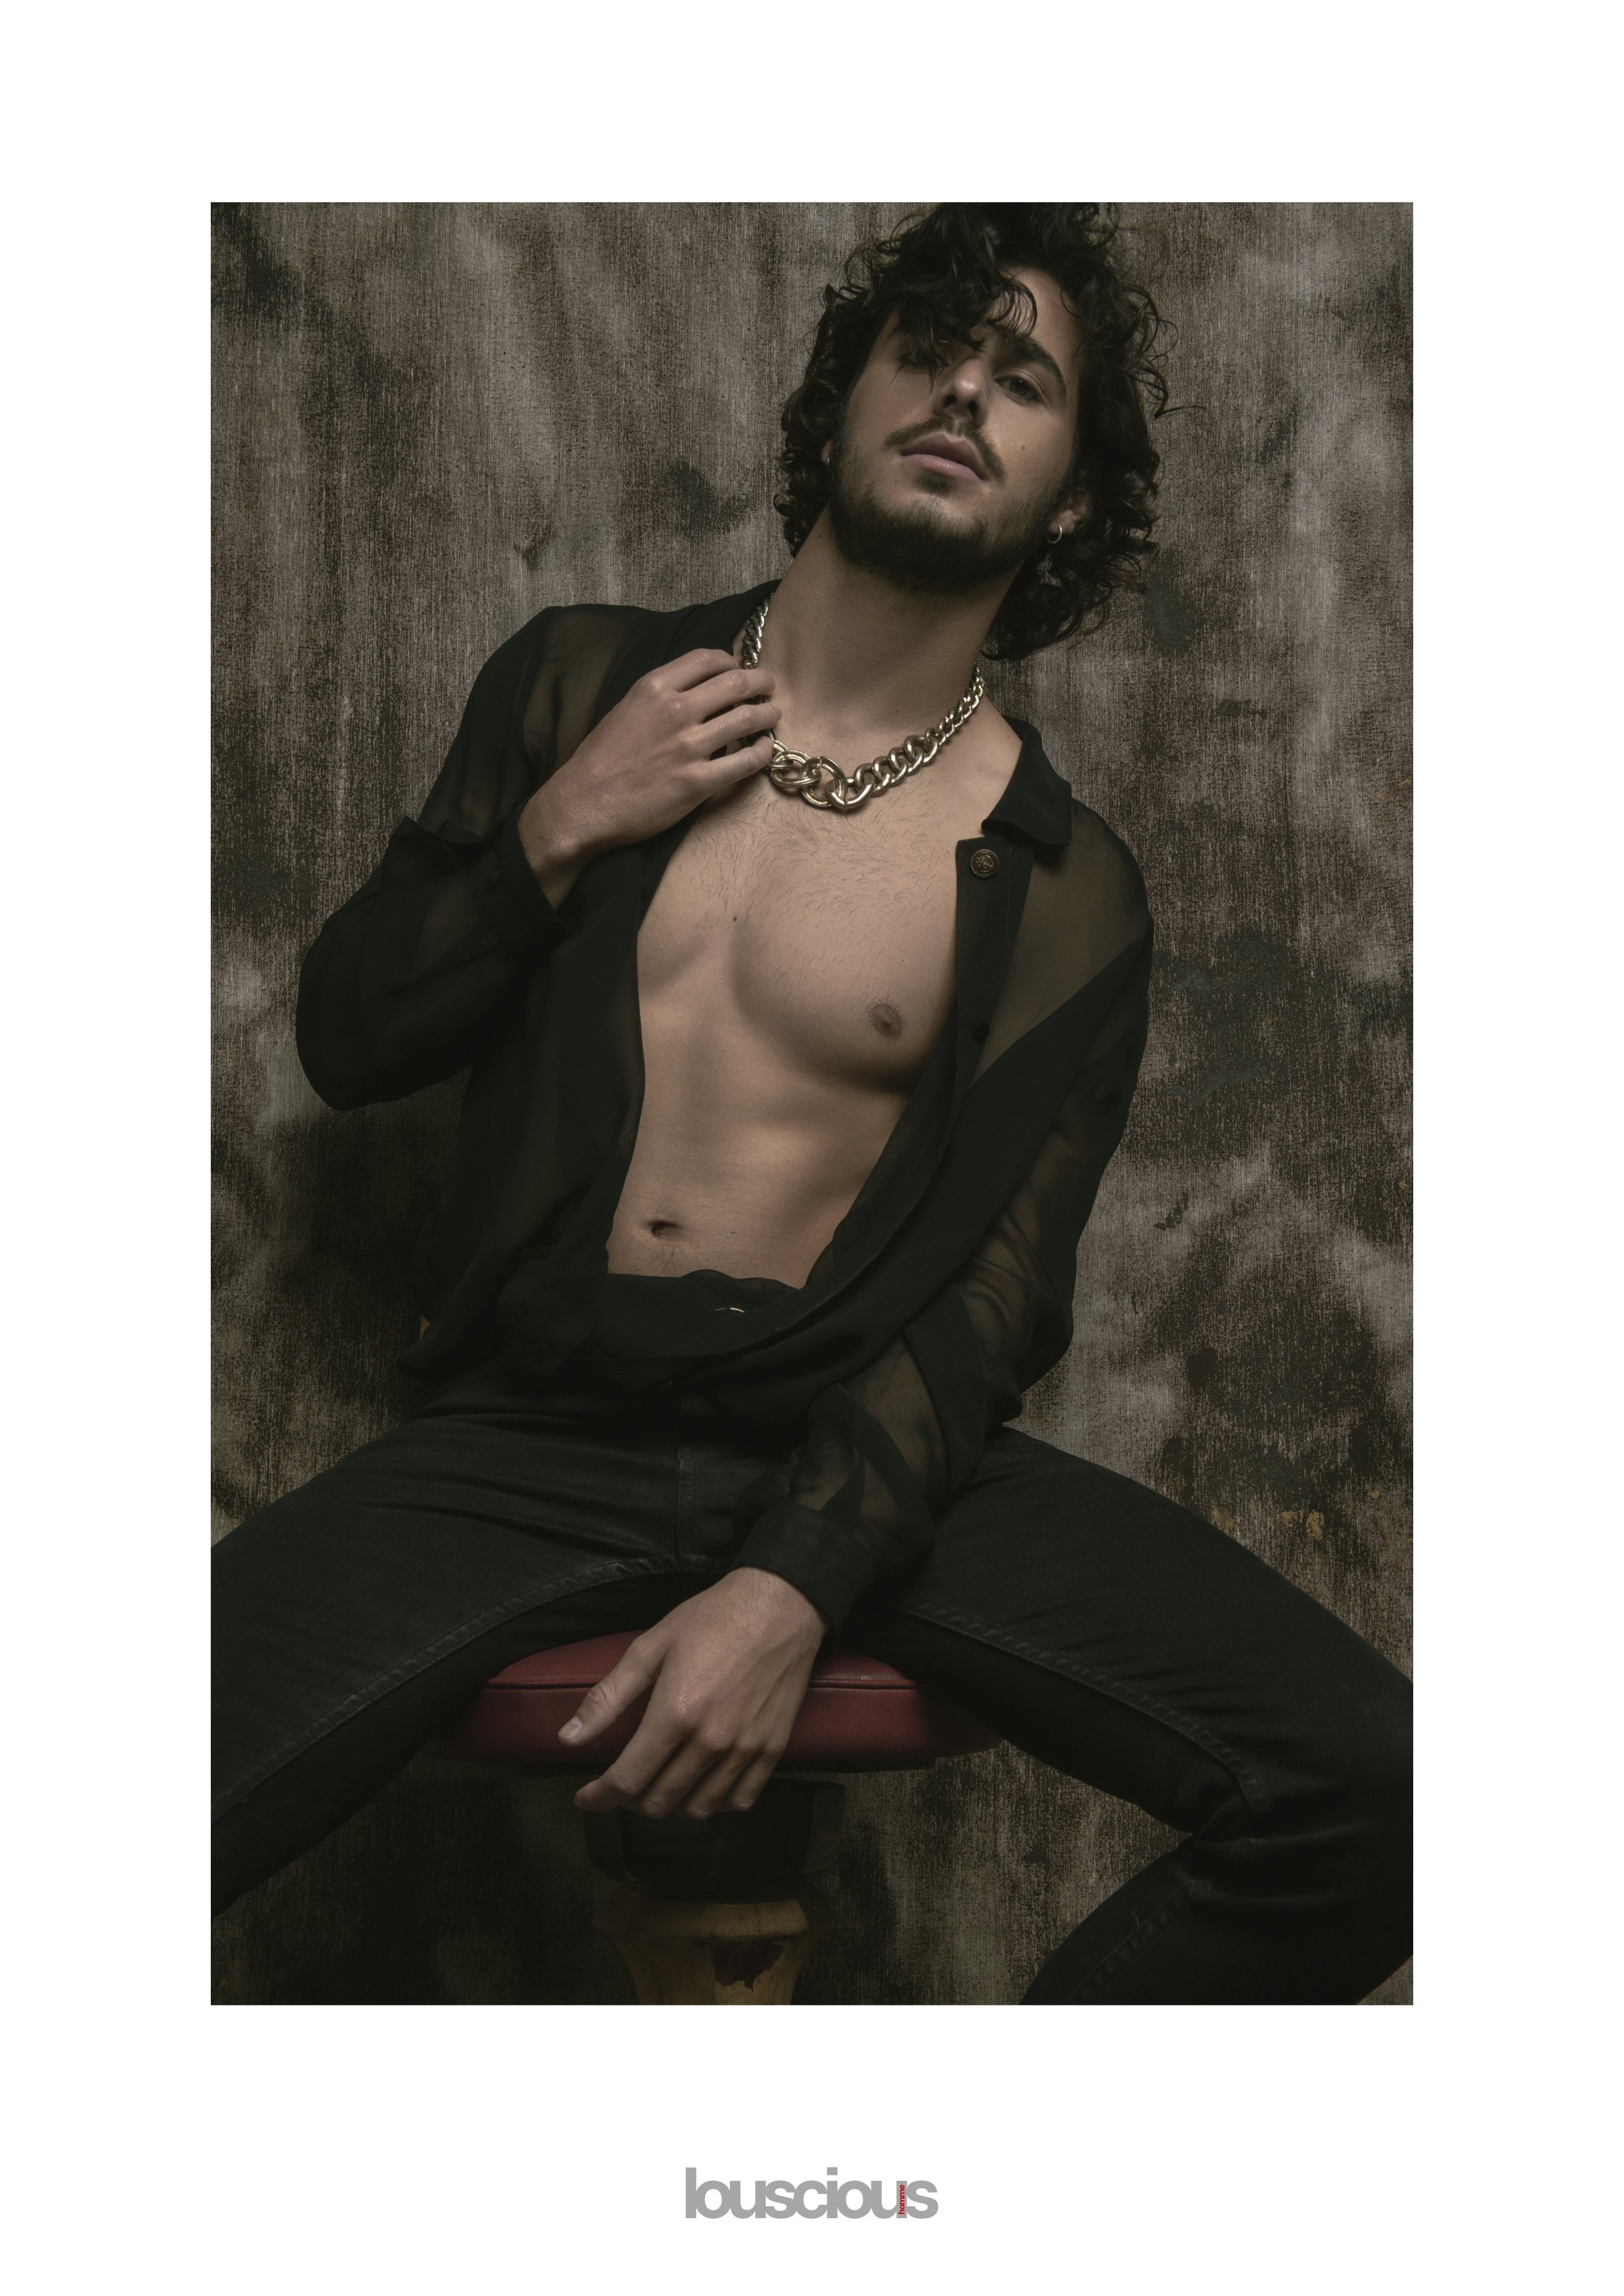 Louscious Homme Online Editorial - He´s the only one by Juan Carlos Canahuiri  _19.jpg